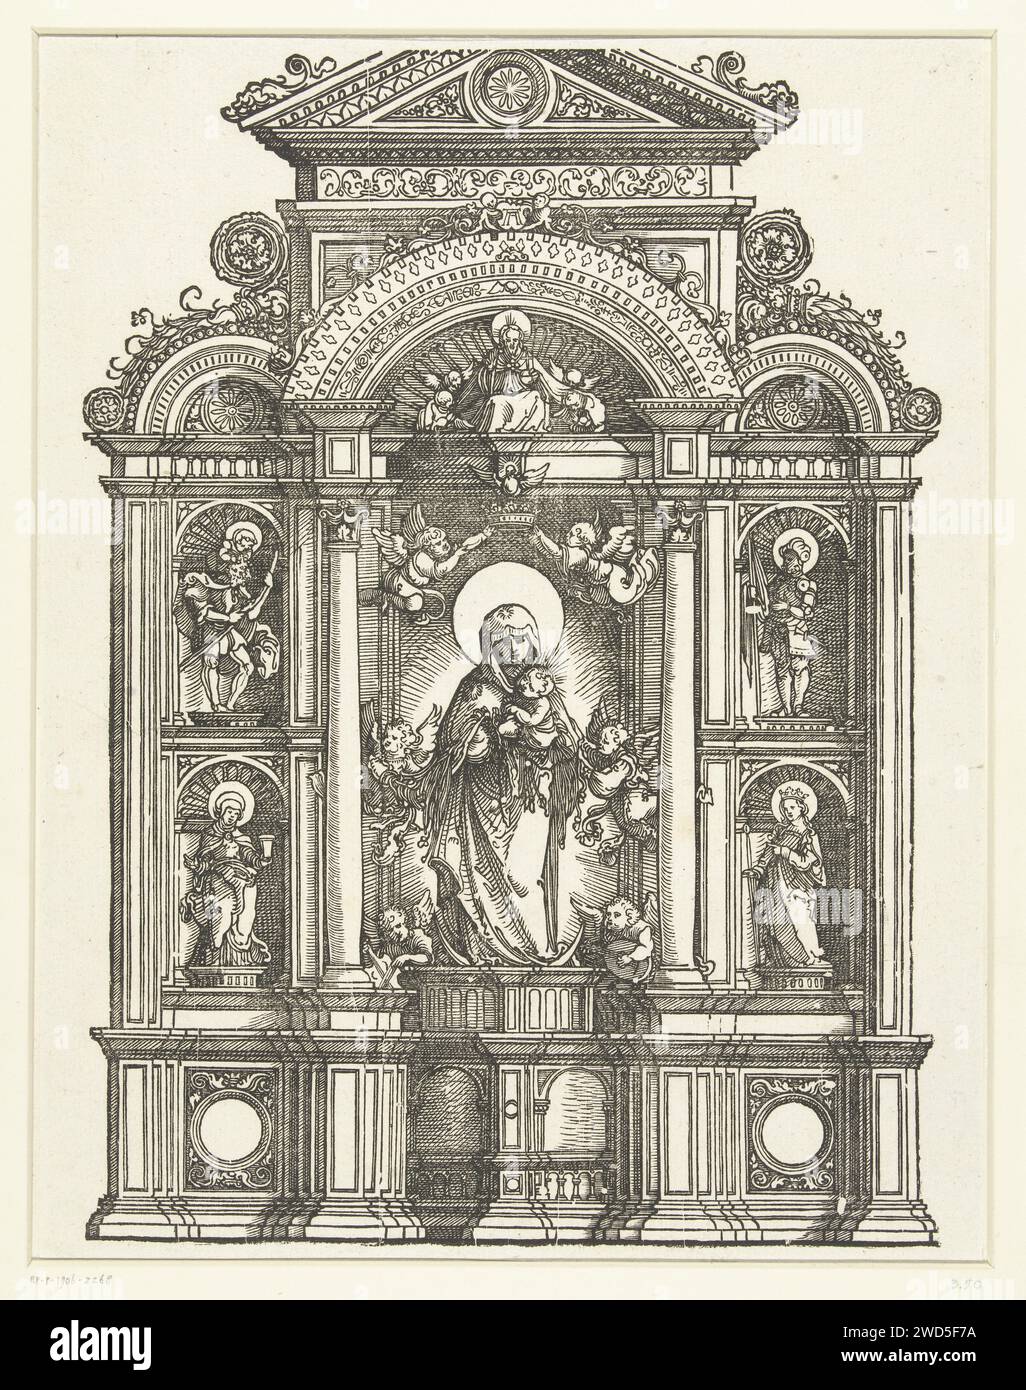 Altar with Maria and Kind, Albrecht Altdorfer, c. 1506 - 1538 print An altar with Mary in the middle with the Christ child in a niche surrounded by six angels, two of which hold a crown over her head. In addition, the Holy Spirit and God the Father. On the left the Holy Christoffel and Mary Magdalena in a niche, on the right the Holy Florian and Saint Catharina. Germany paper  altar. Mary standing (or half-length), the Christ-child sitting on her arm (Christ-child to Mary's left). the virgin martyr Catherine of Alexandria; possible attributes: book, crown, emperor Maxentius, palm-branch, ring, Stock Photo